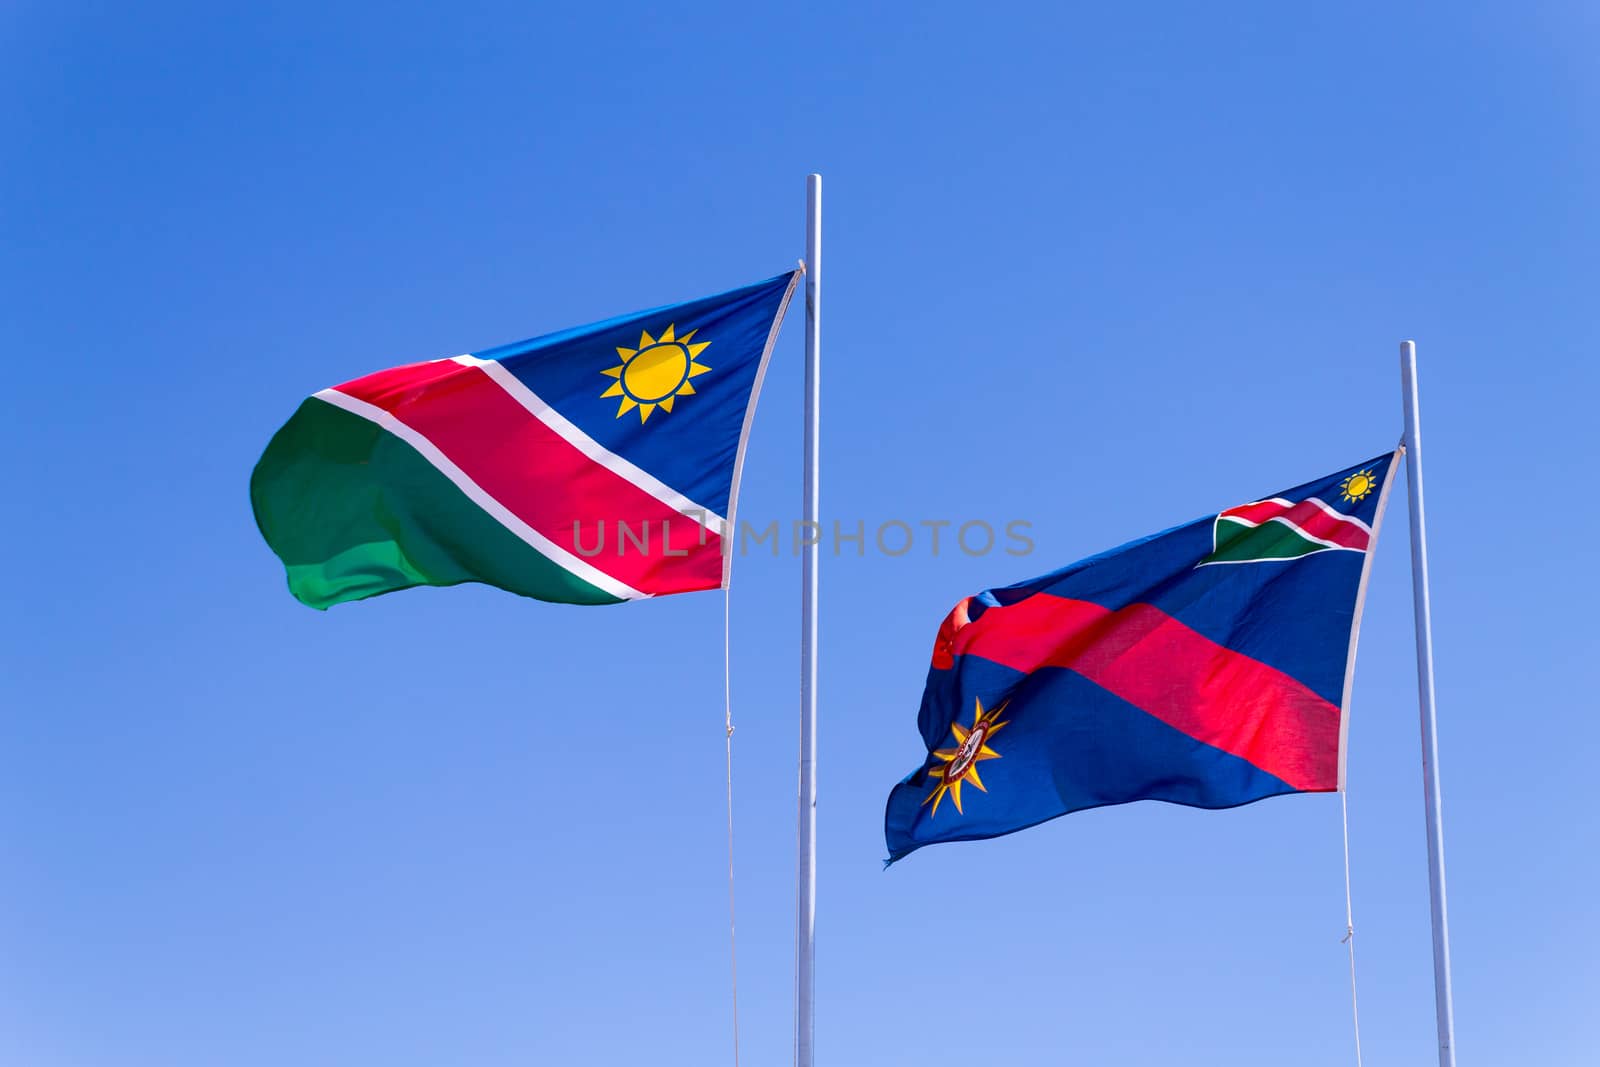 Namibian flags waving in the wind